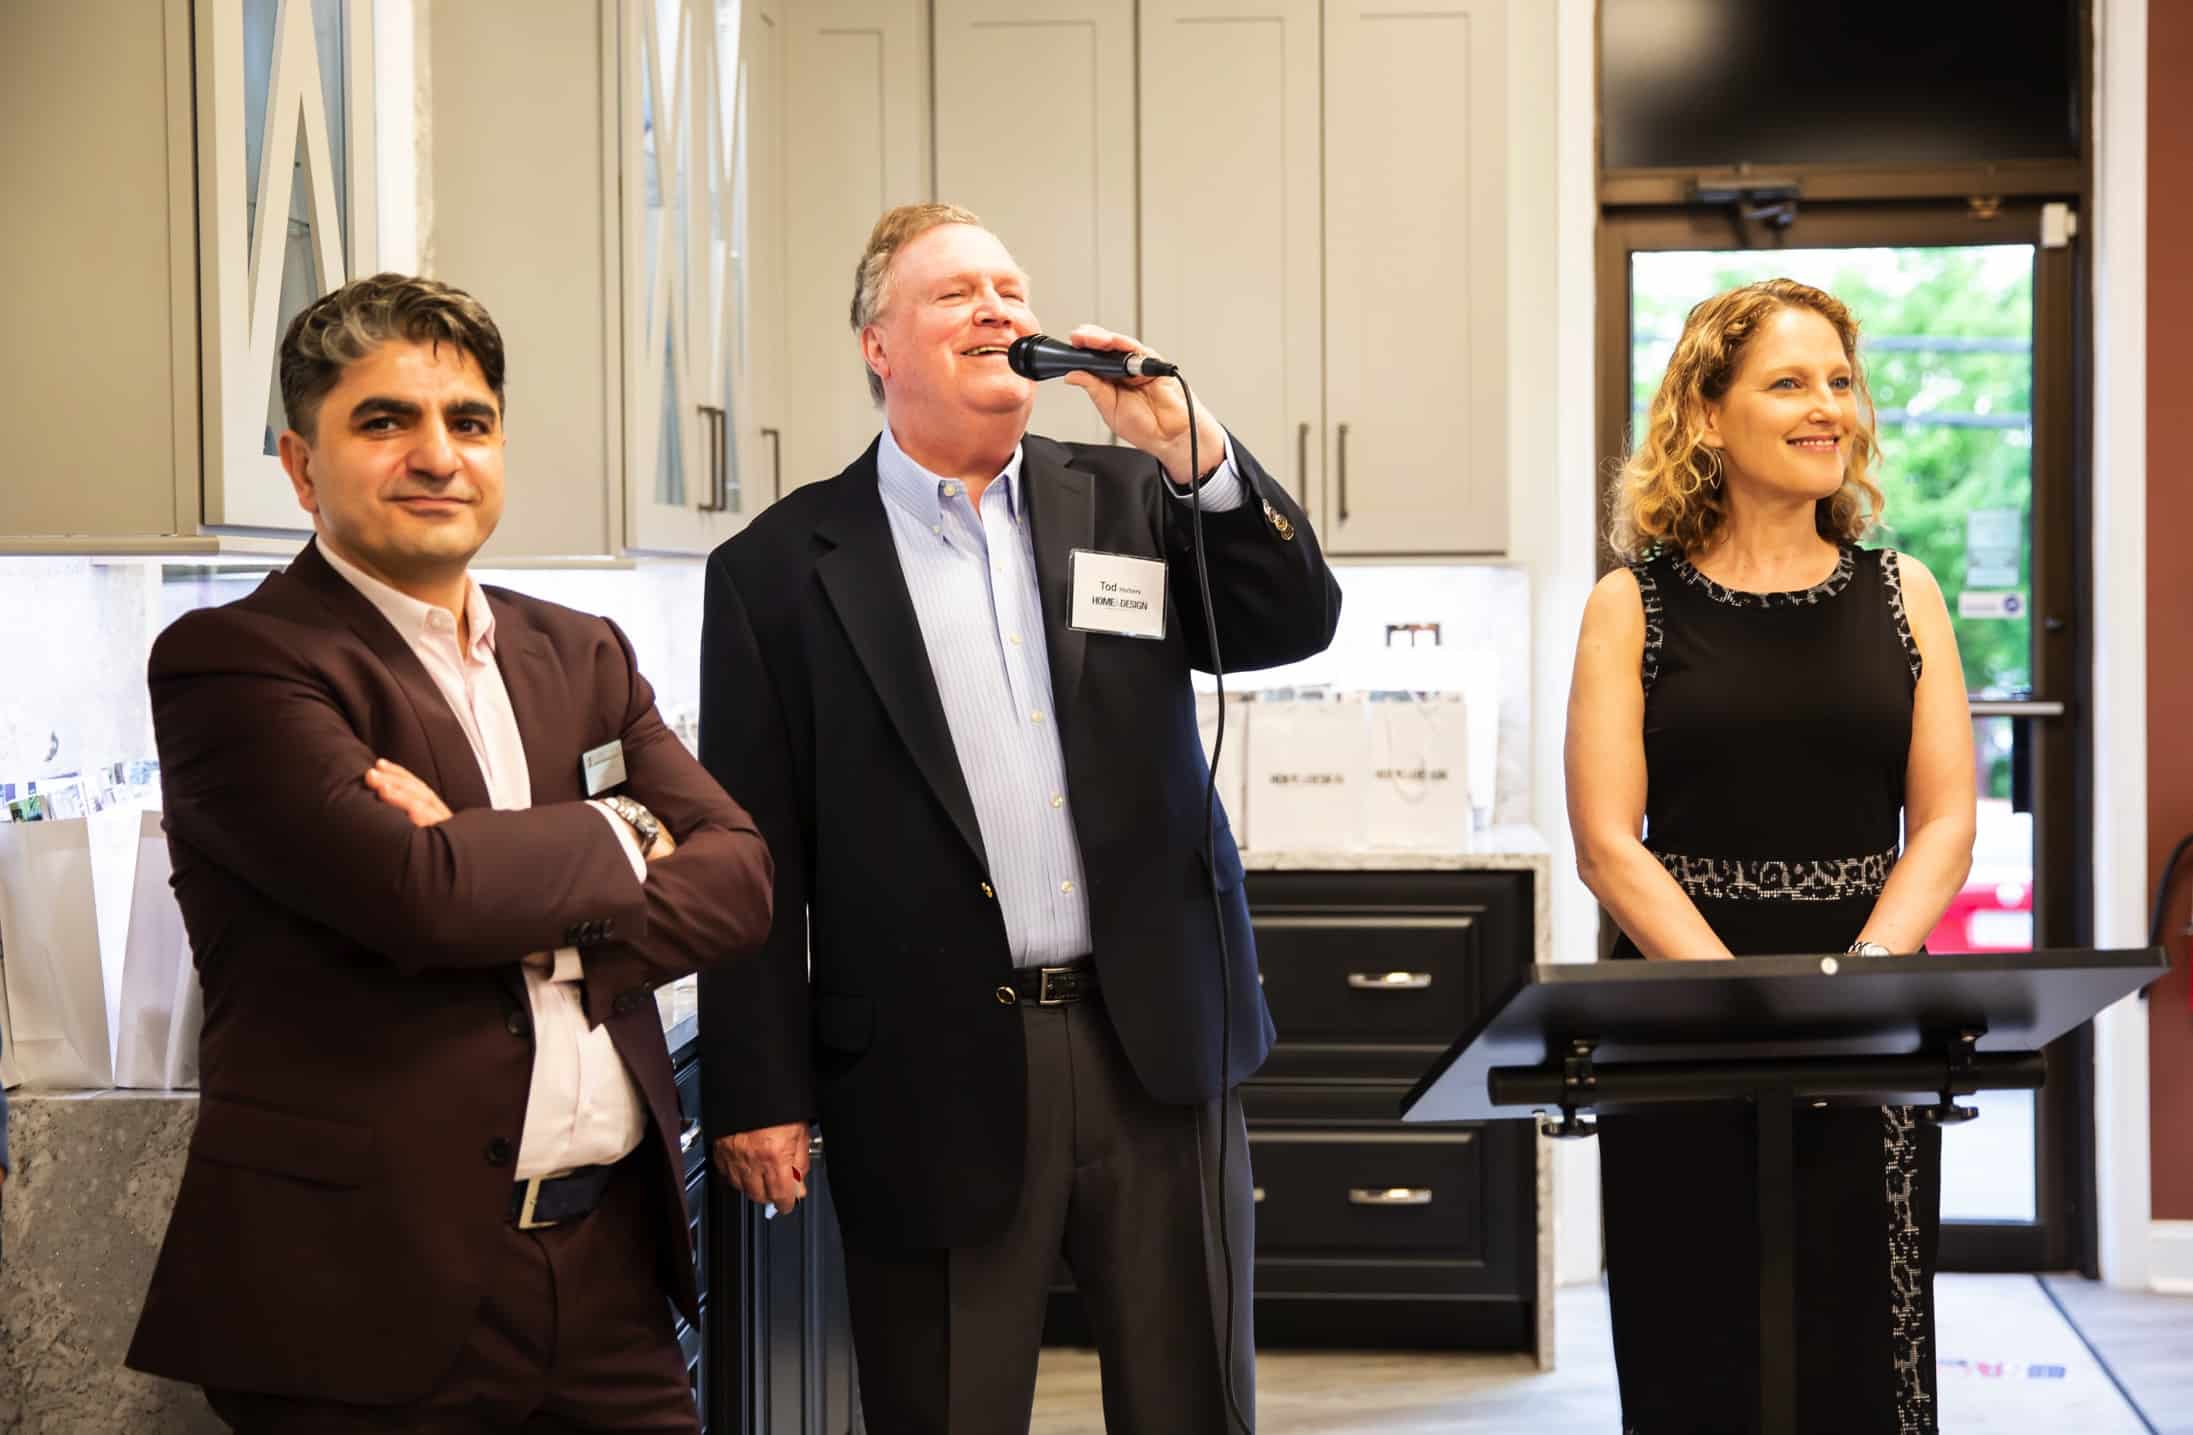 HOME & DESIGN INSIGHT LOOK EVENT